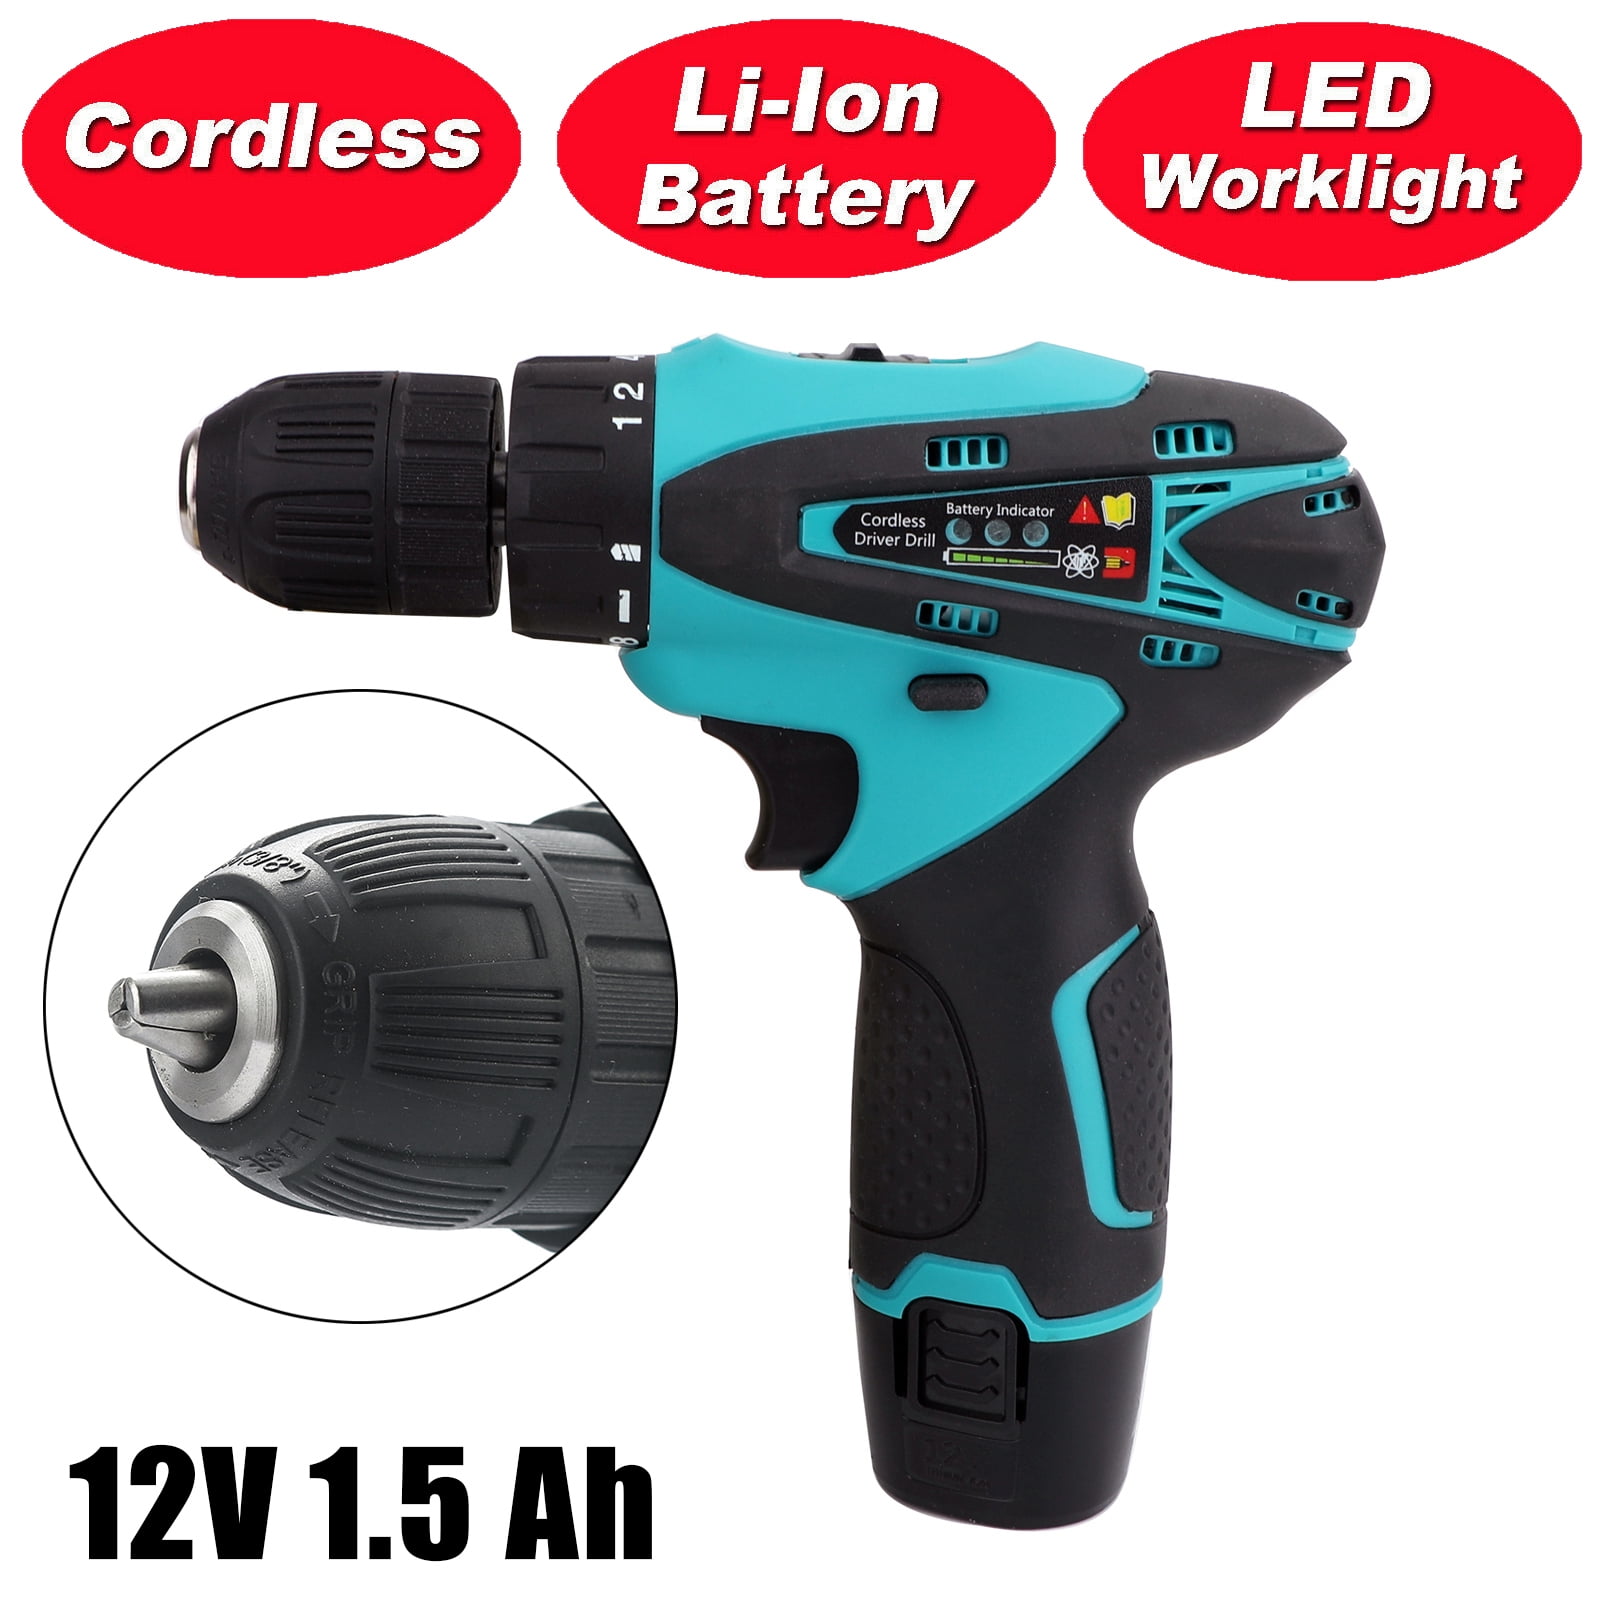 JMG Electric Drill Cordless Screwdriver Lithium Battery Two-Speed Mini  Drill Cordless Screwdriver Power Tools Included Power Charger and Box,2